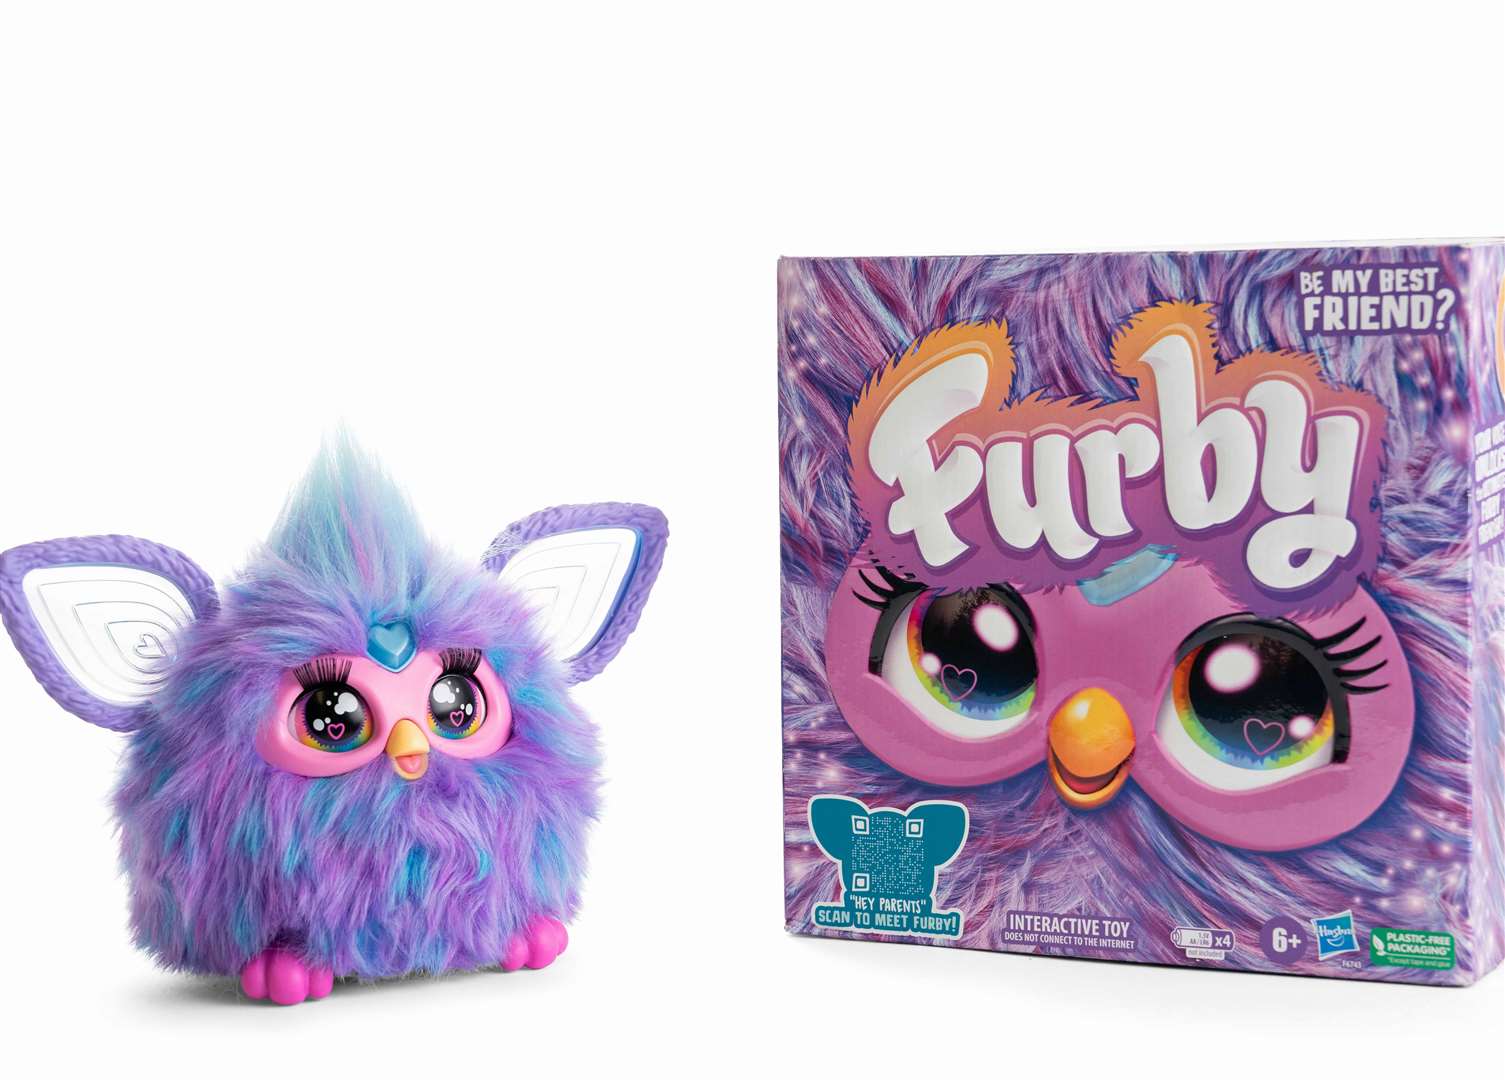 Fluffy Furby toys are back and have made it onto the Argos list. Image: Argos.